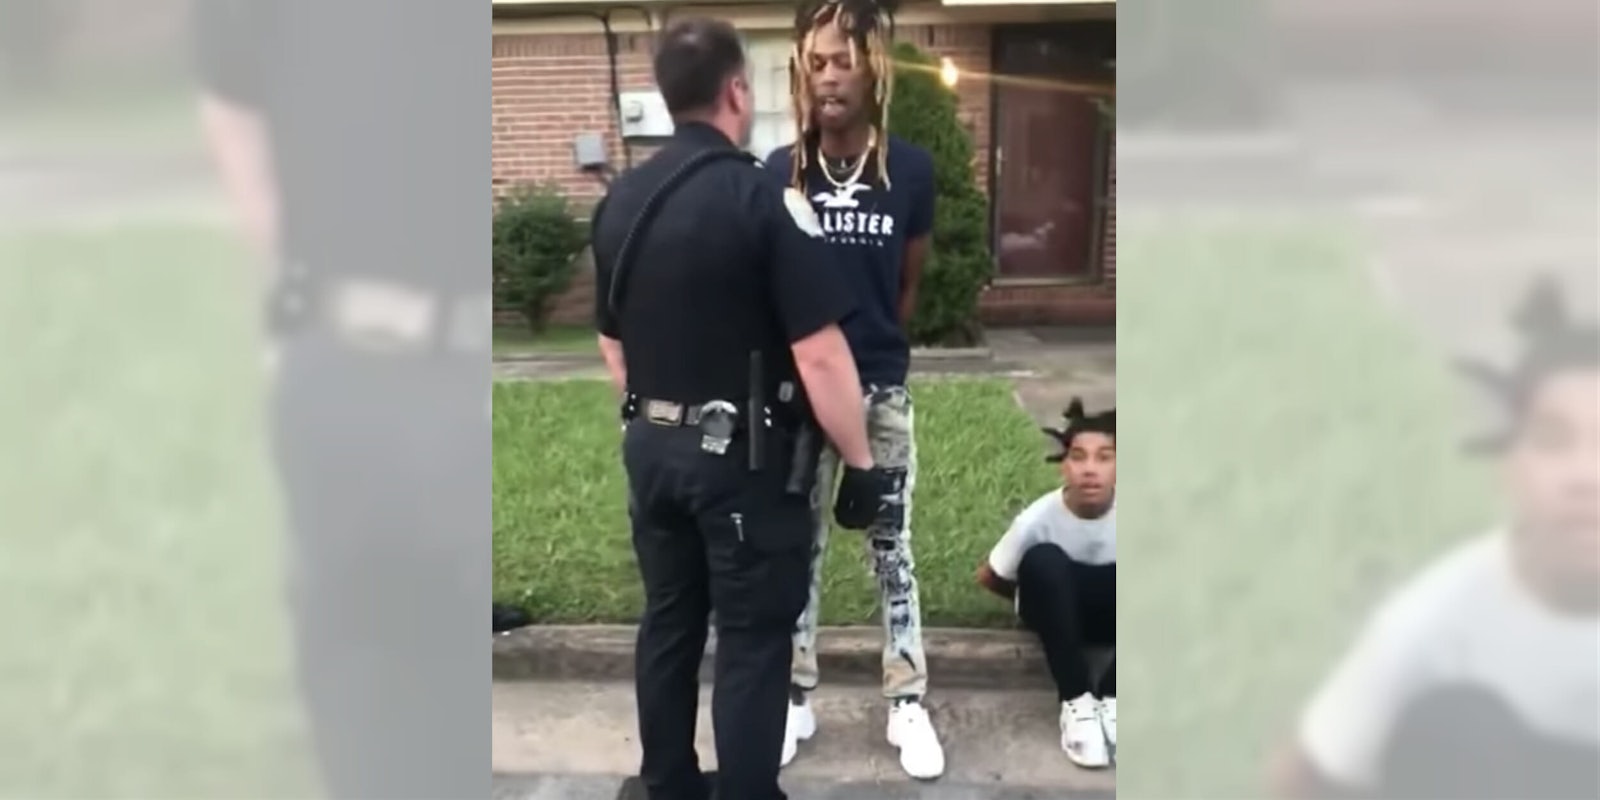 Police offer tells a Black man that 'f*ck you is my name.'